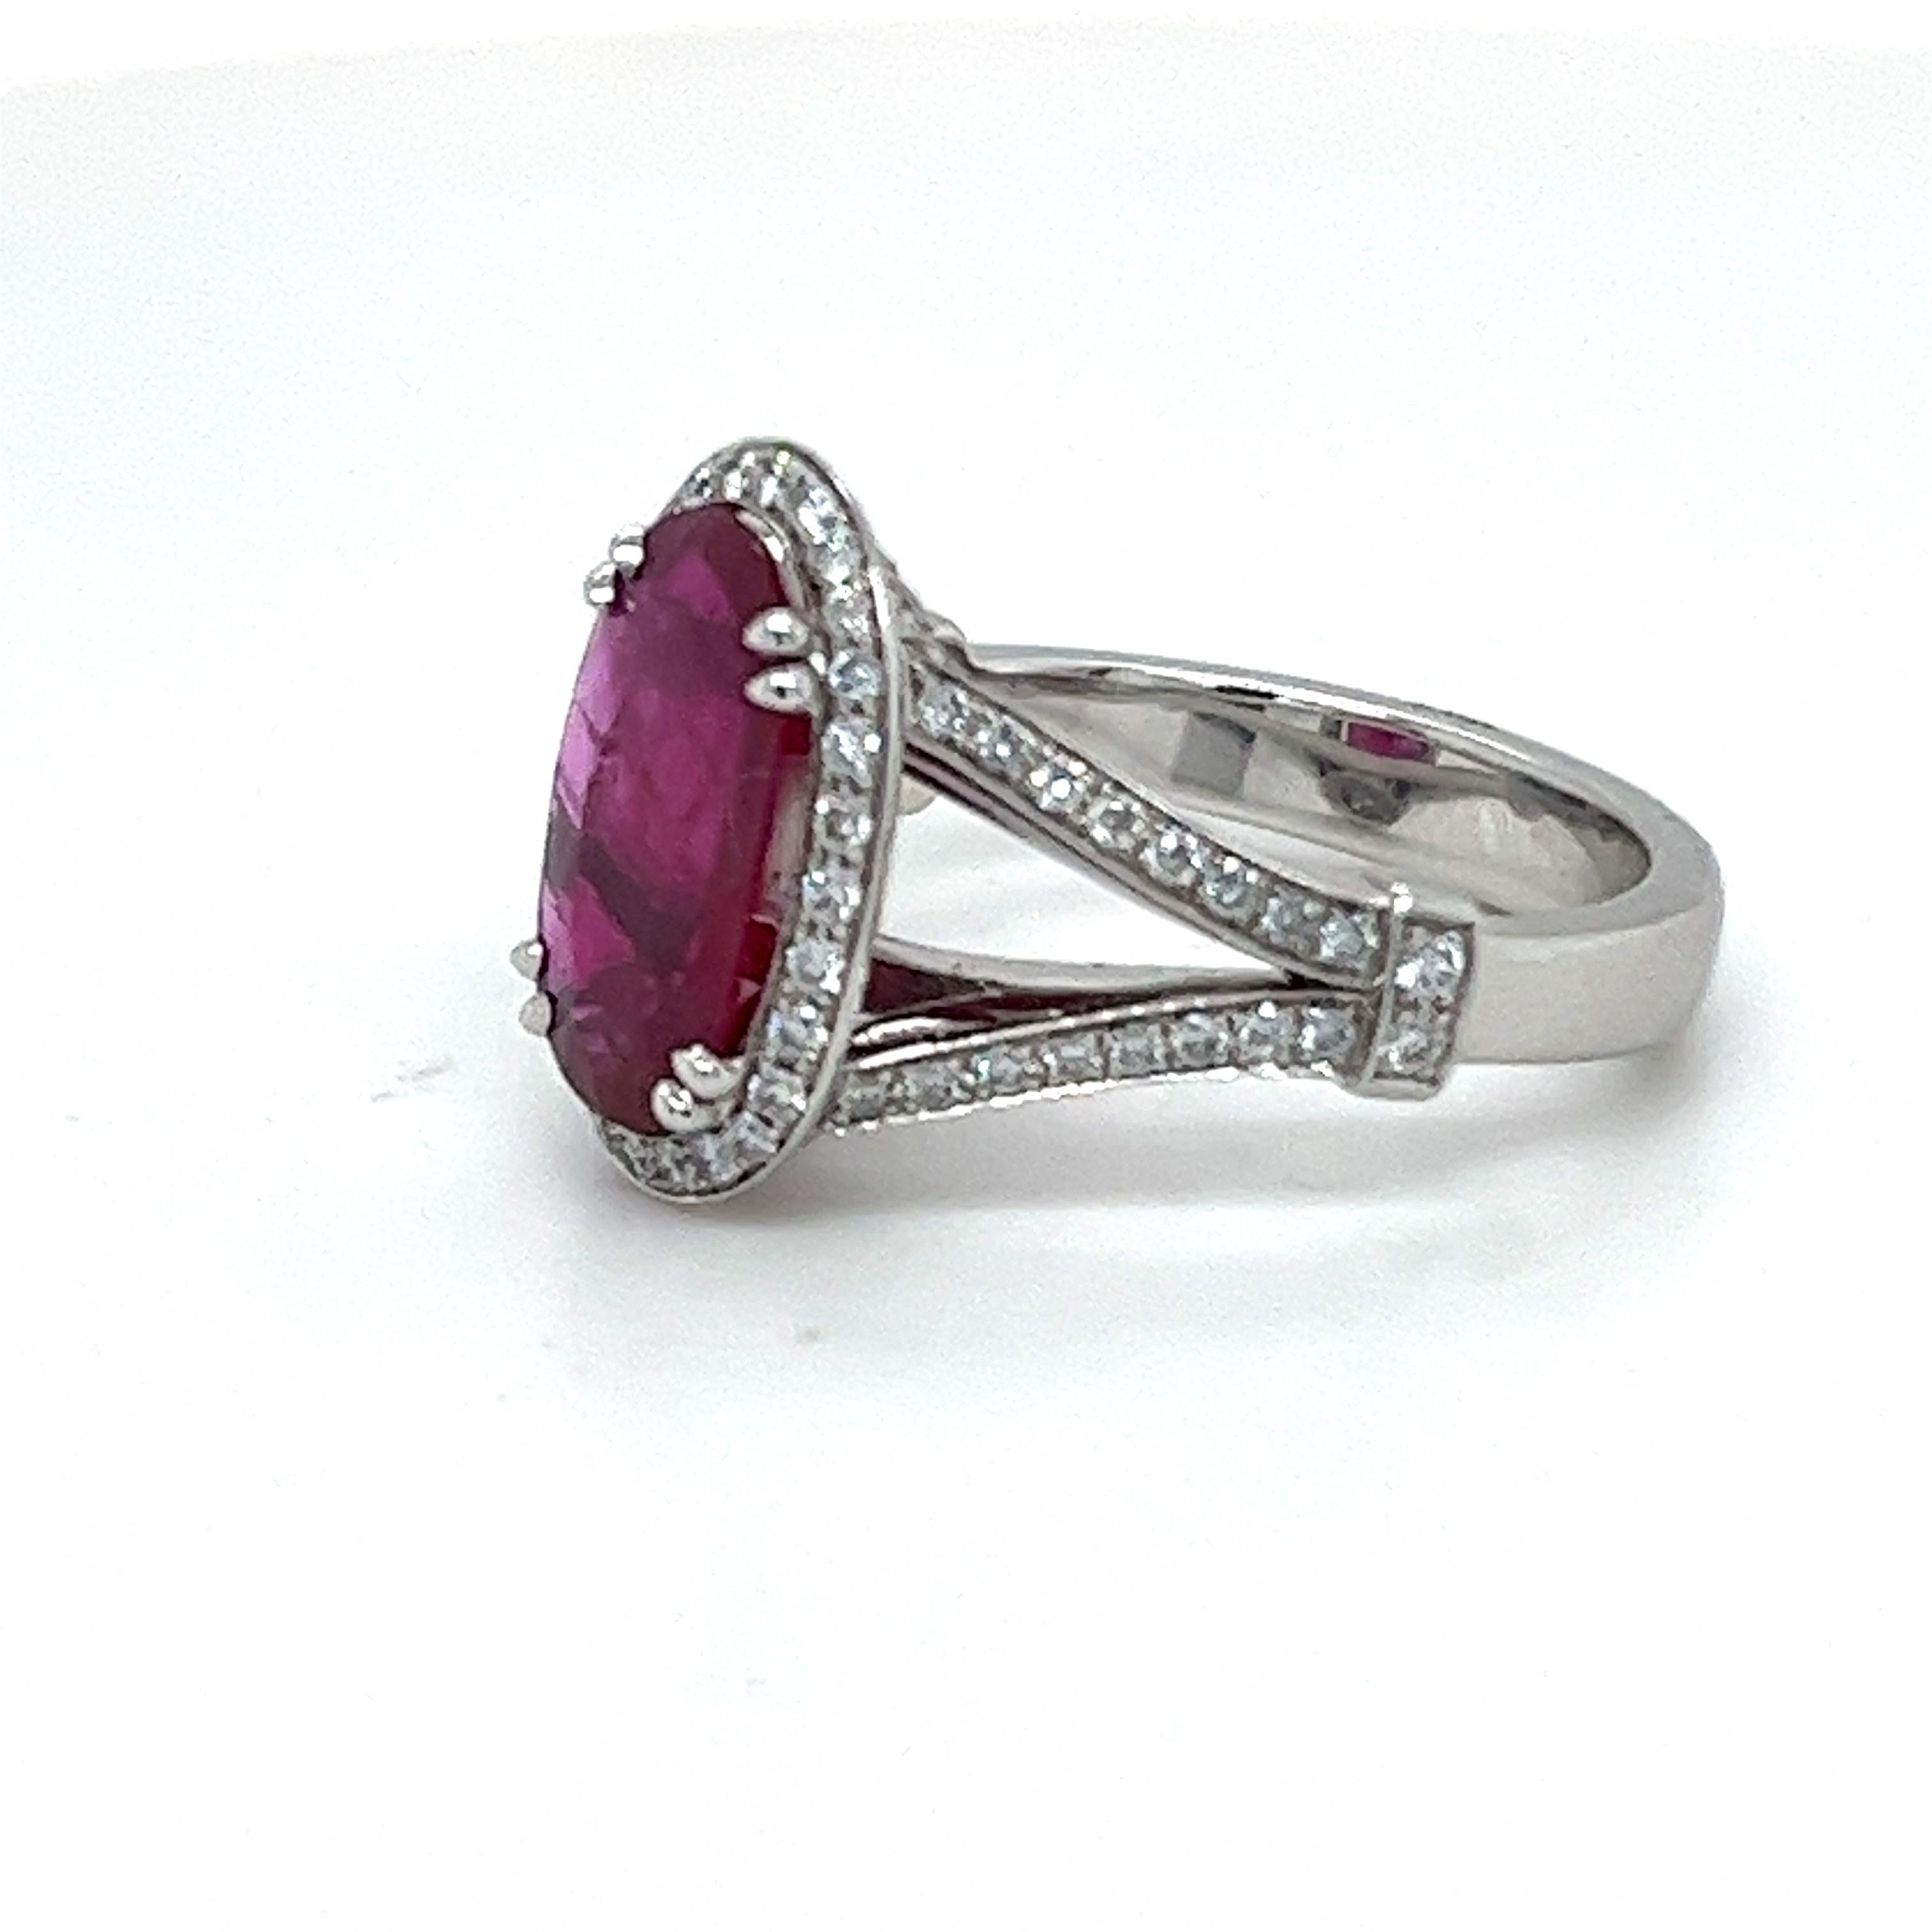 Ravishing 18 karat white gold, 2.75 carats ruby and diamond engagement ring.
Crafted in 18 karat white gold and centering upon an oval, faceted ruby of 2.75 carats. The ruby entourage and the delicate split shank are set with with brilliant-cut